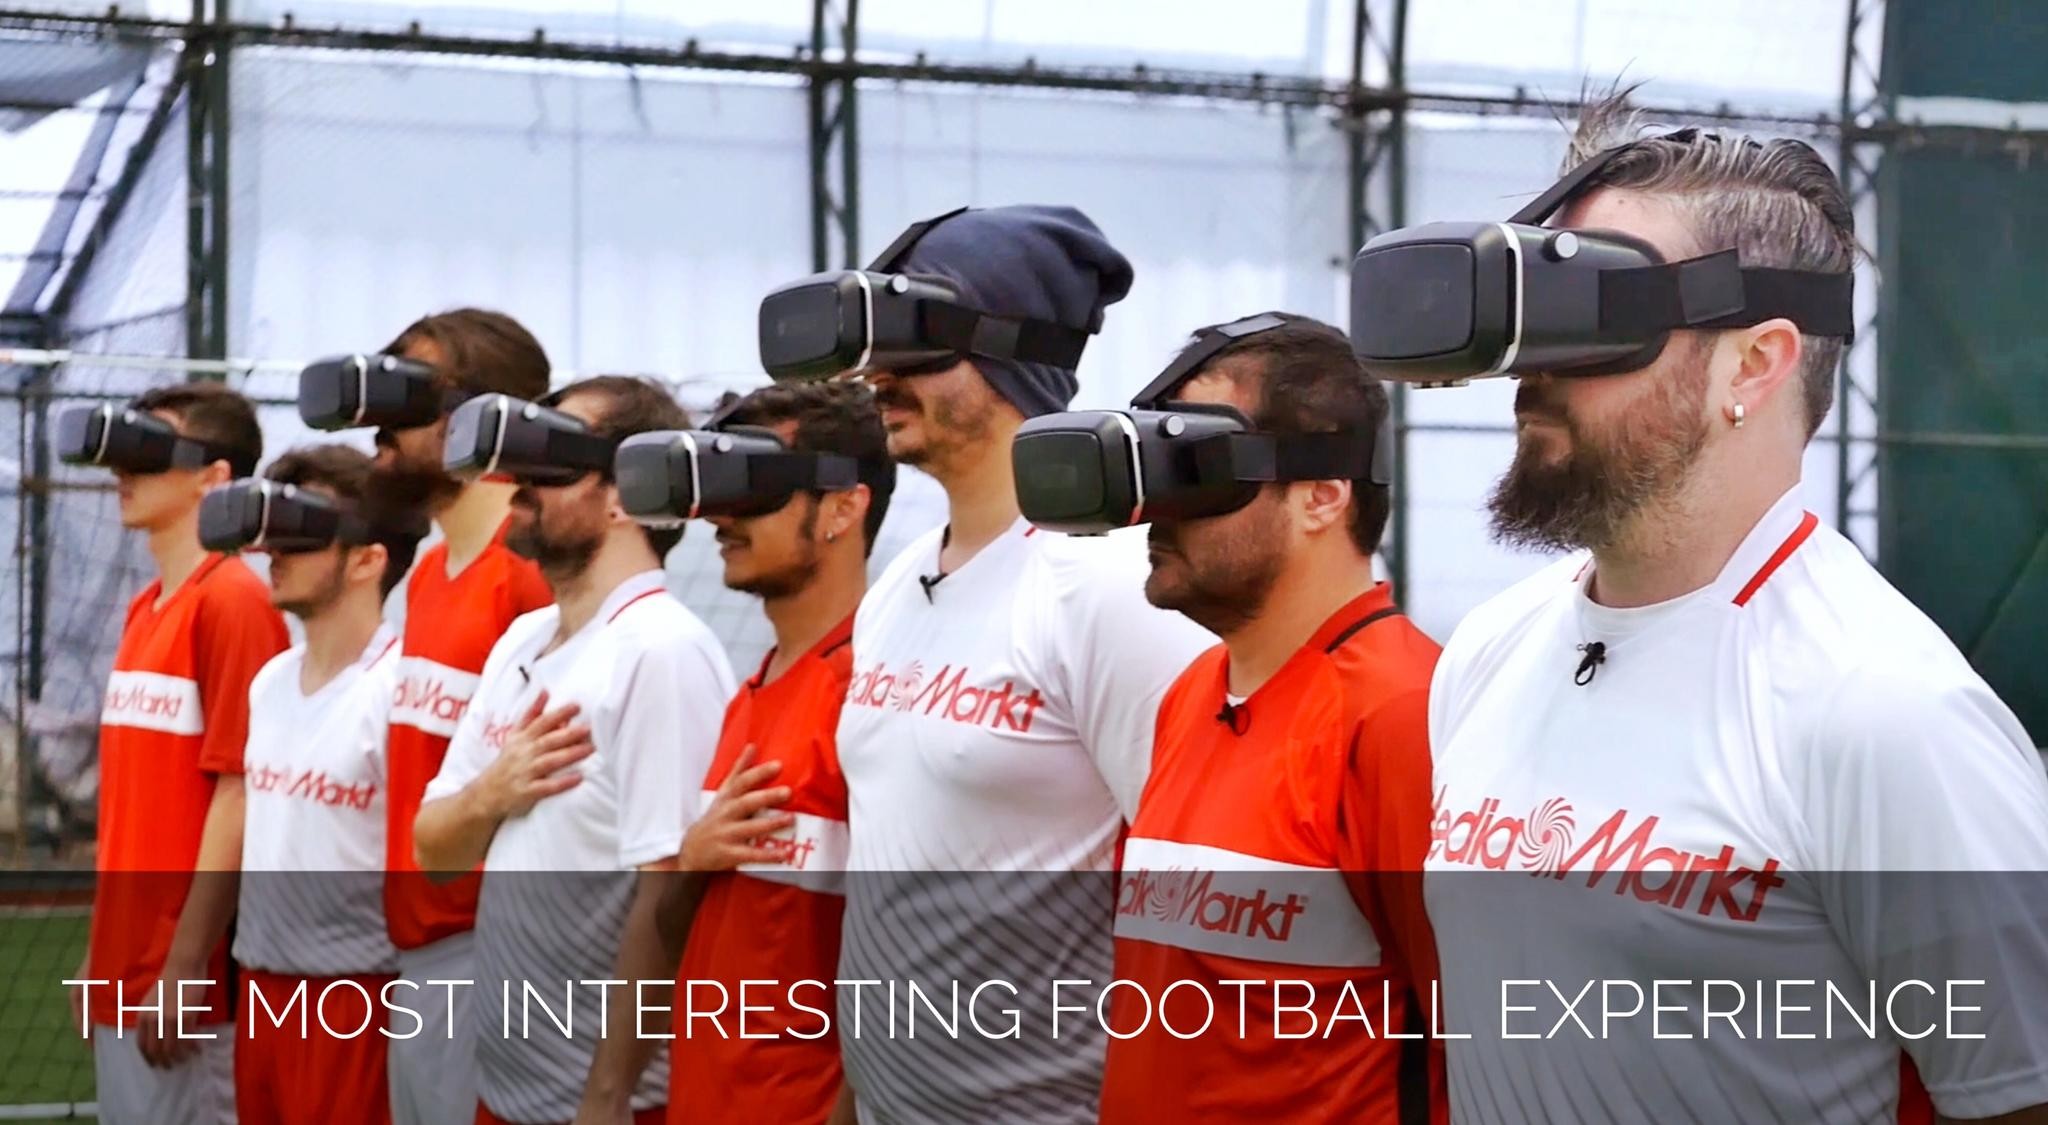 Football Match in Bird's-Eye View (With VR Glasses)